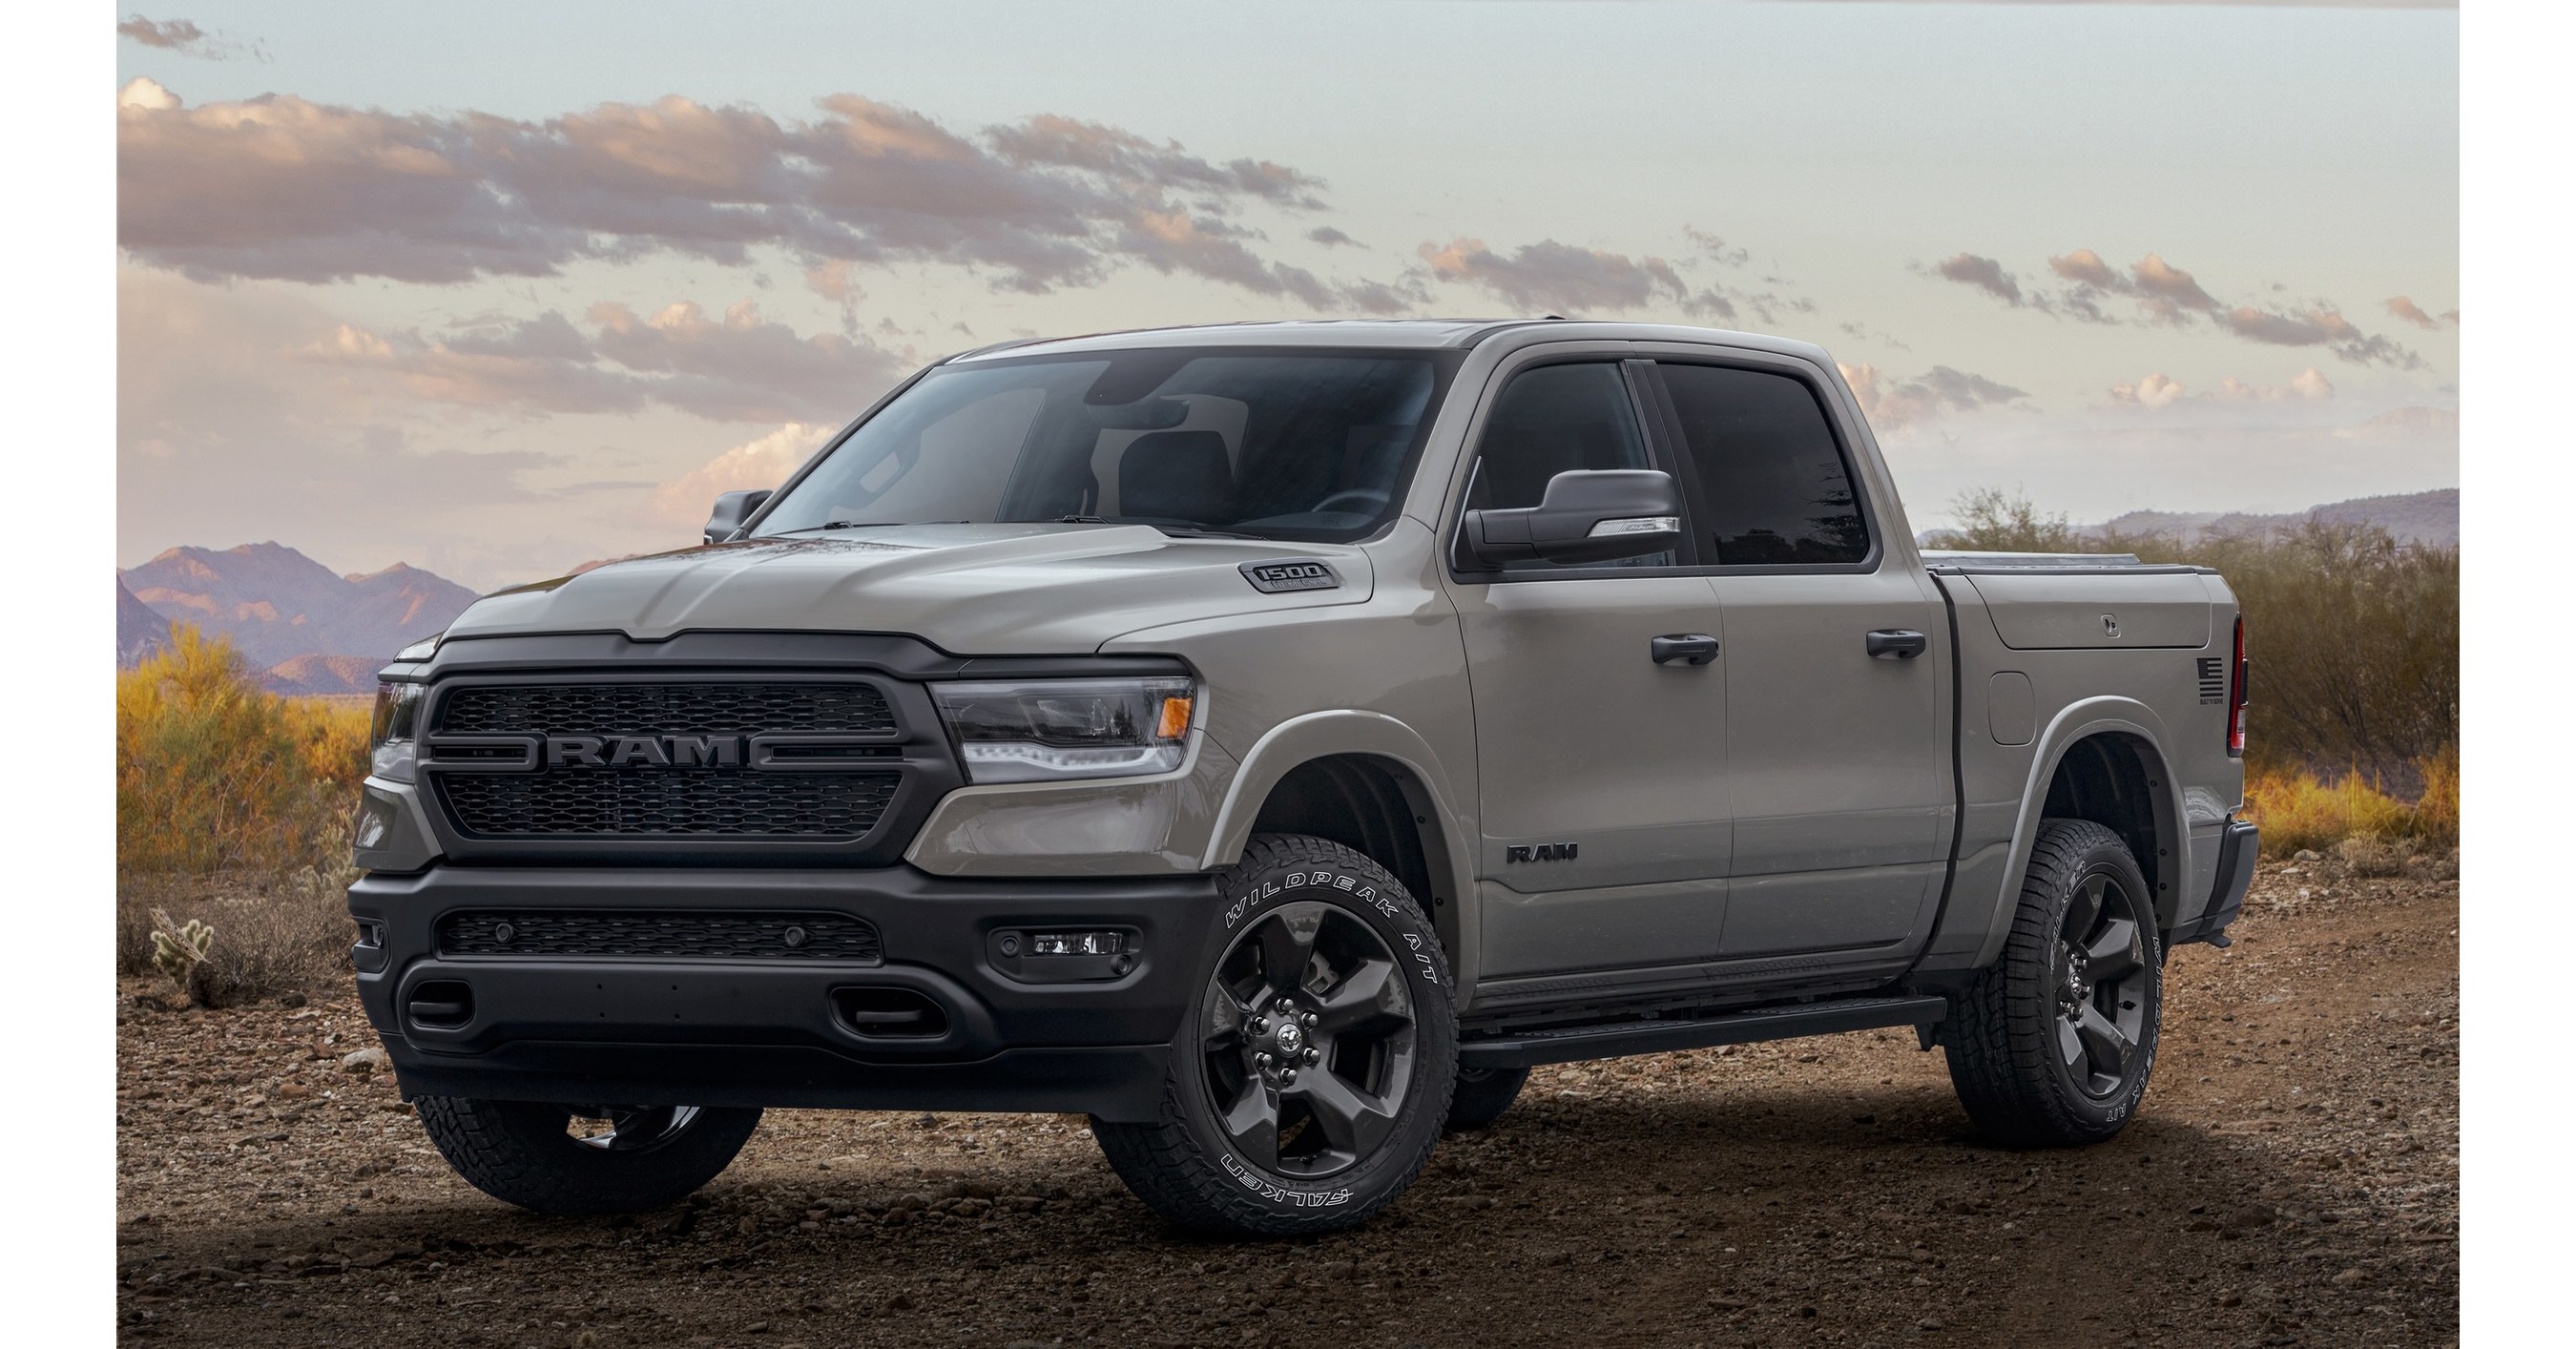 Ram Introduces New Built To Serve Edition Trucks